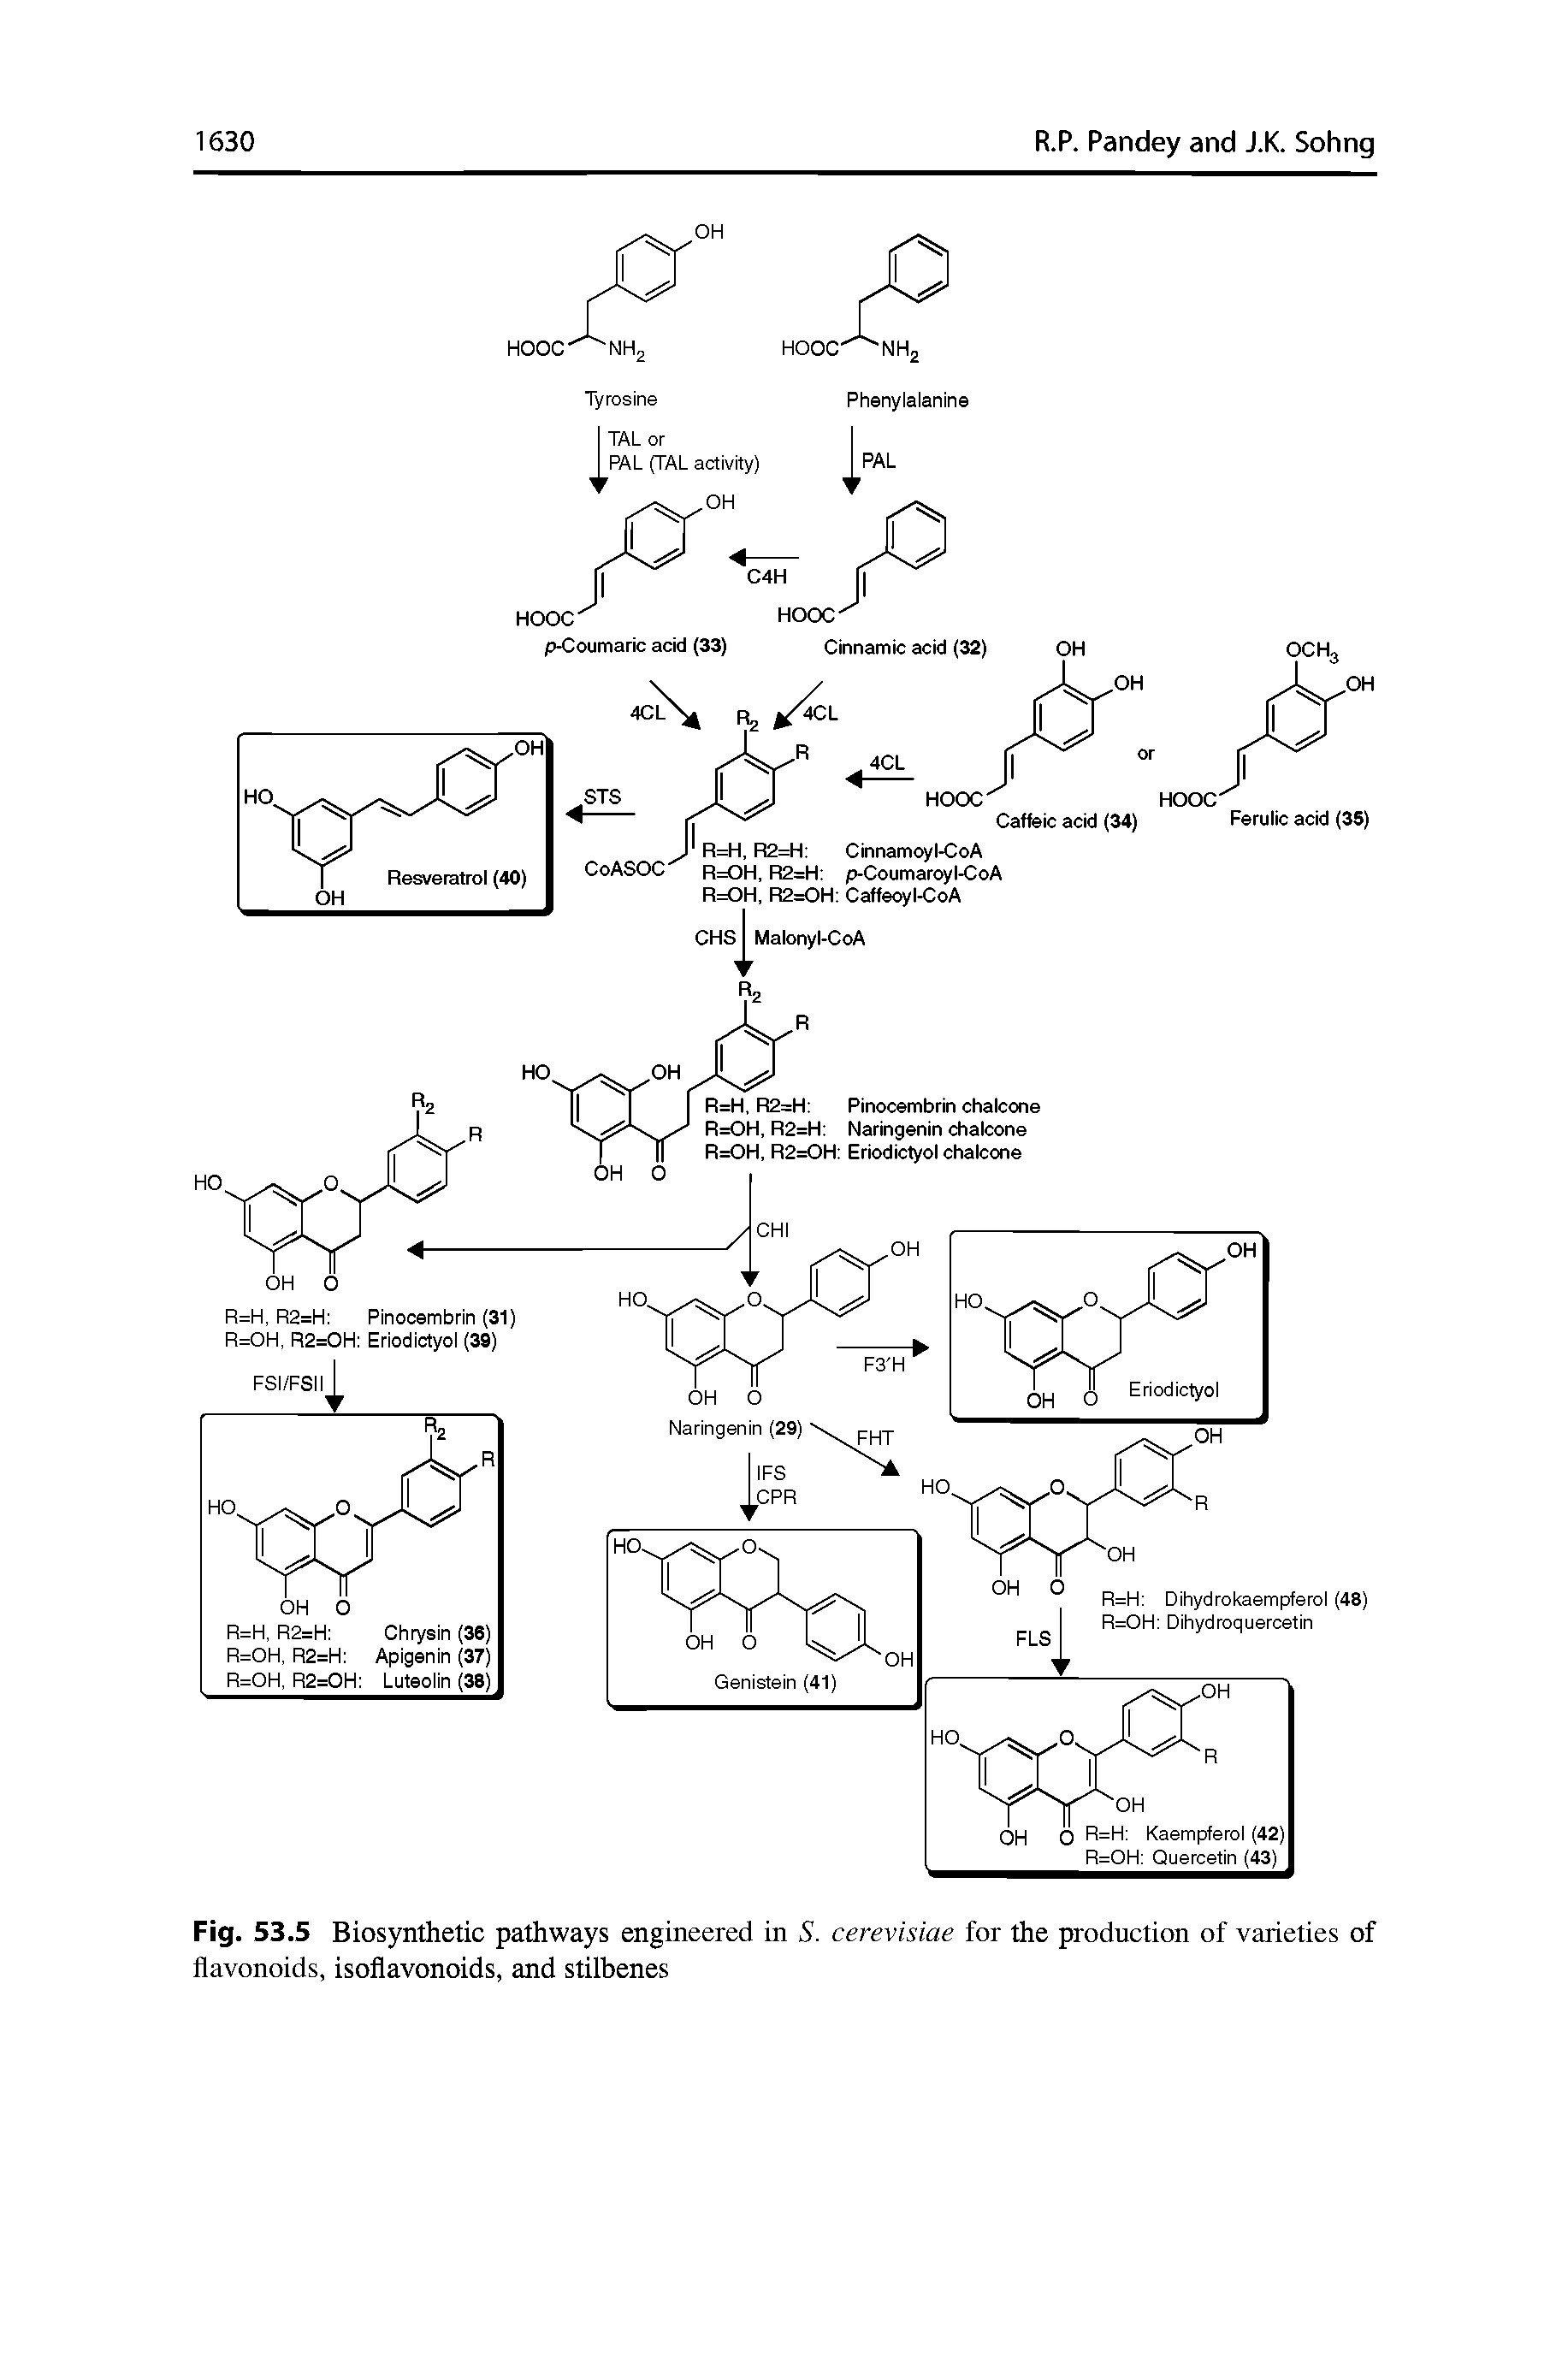 Fig. 53.5 Biosynthetic pathways engineered in S. cerevisiae for the production of varieties of flavonoids, isoflavonoids, and stilbenes...